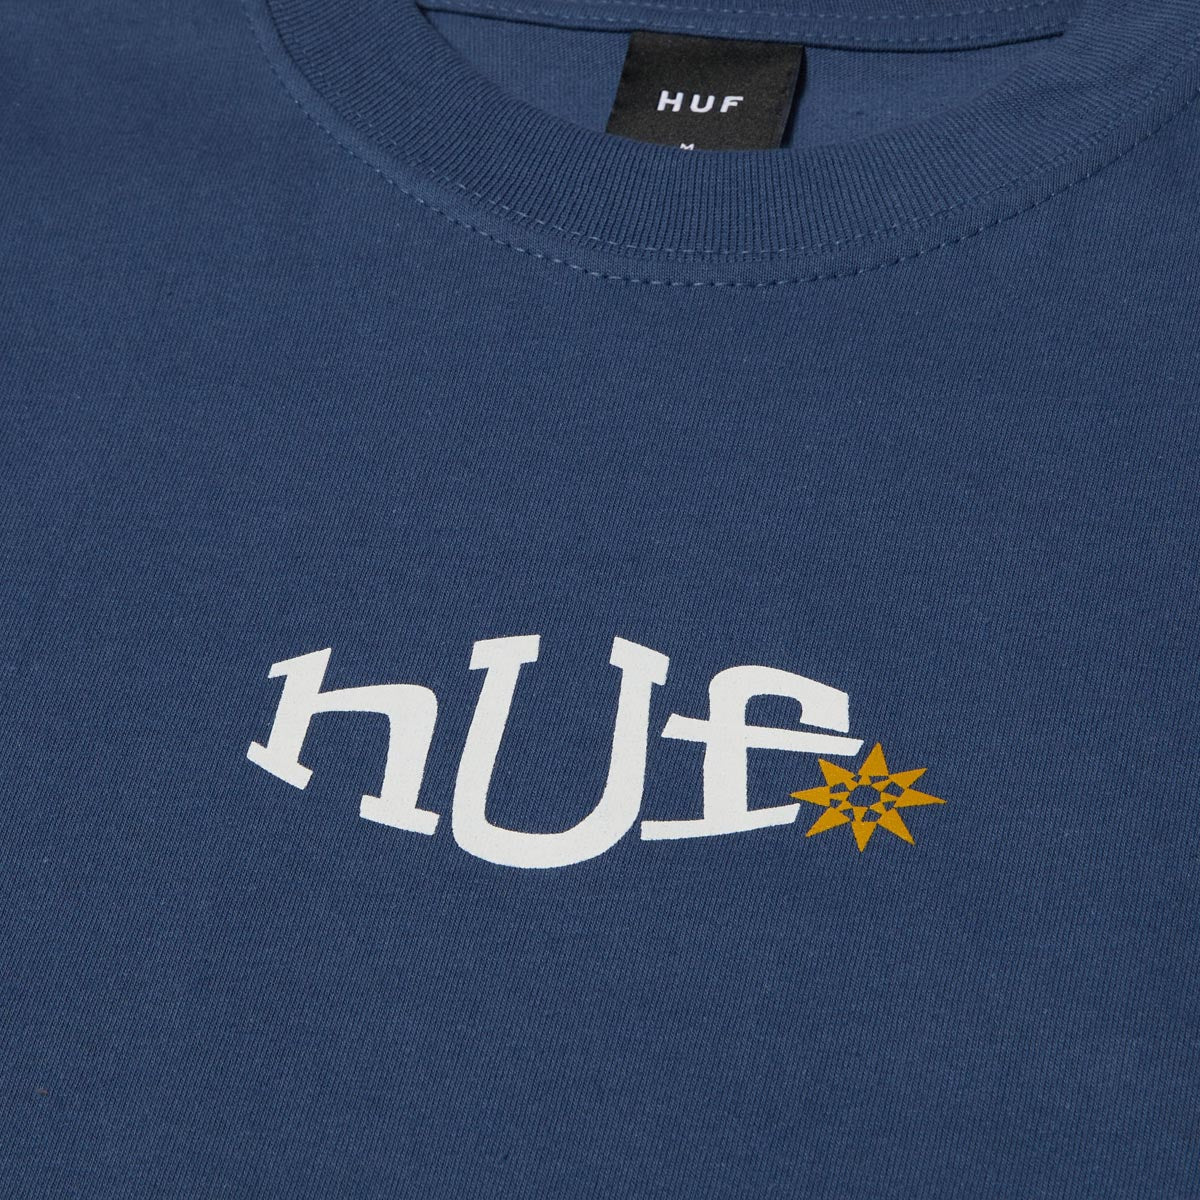 HUF Jazzy Grooves T-Shirt - Slate Blue image 3